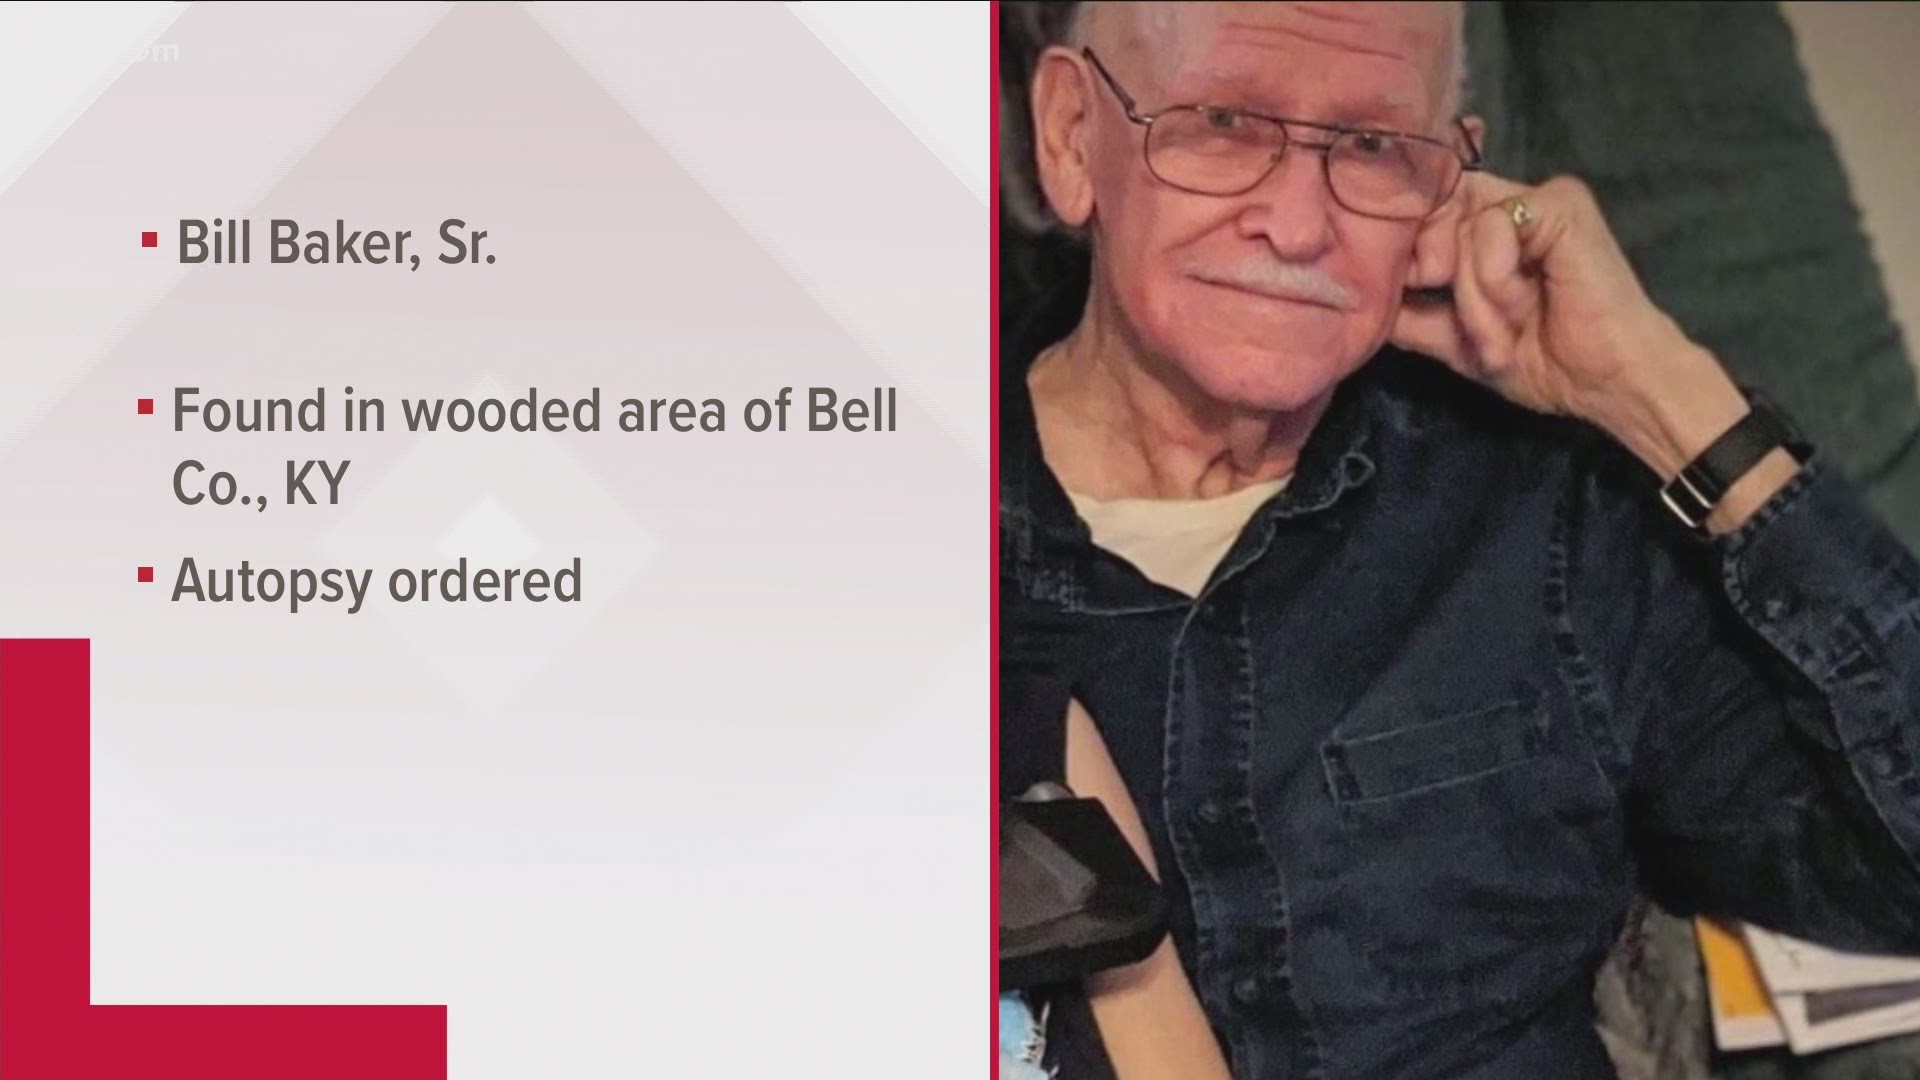 Bill Baker, Sr., 86, was found Wednesday afternoon in a wooded area of Bell County, Ky. Officials are investigating the death.